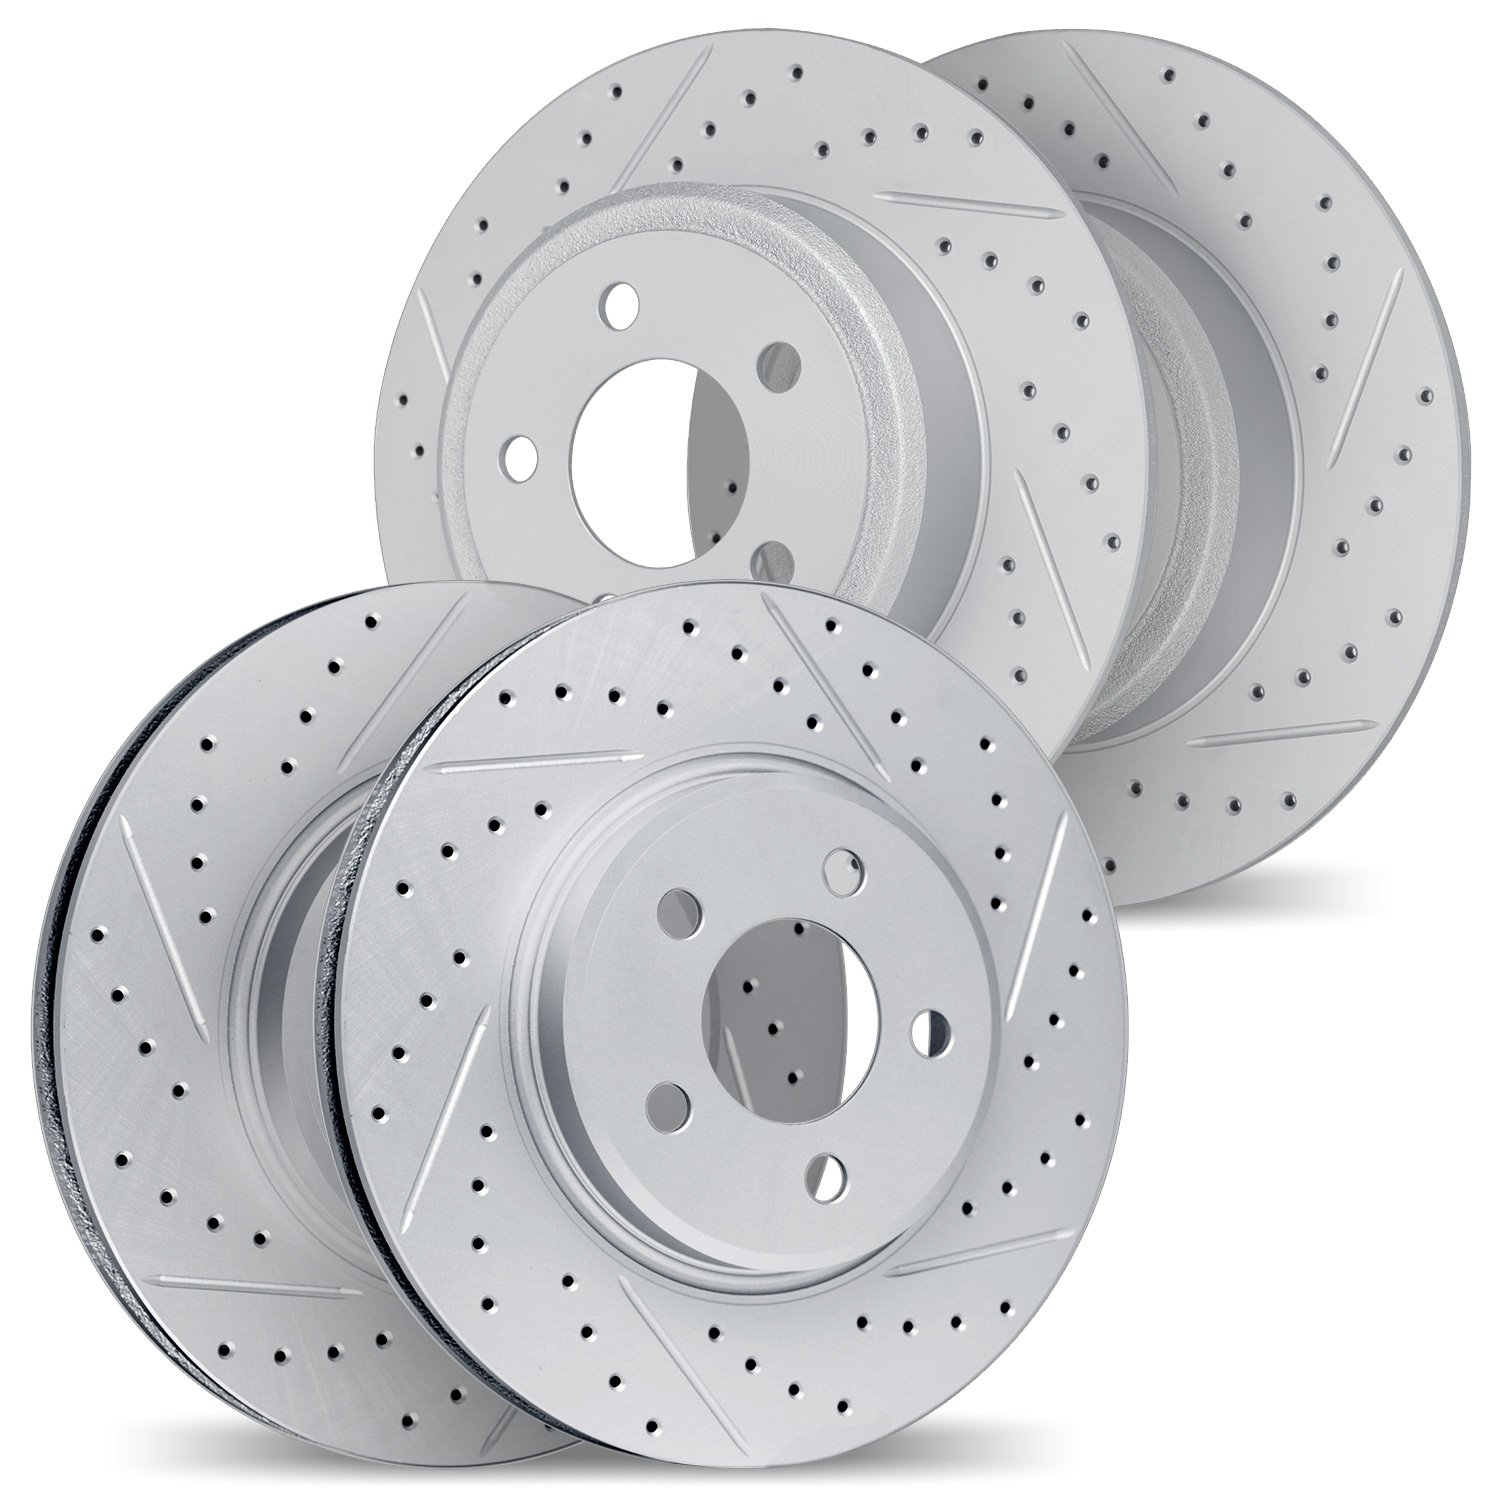 2004-74026 Geoperformance Drilled/Slotted Brake Rotors, 2012-2015 Audi/Volkswagen, Position: Front and Rear